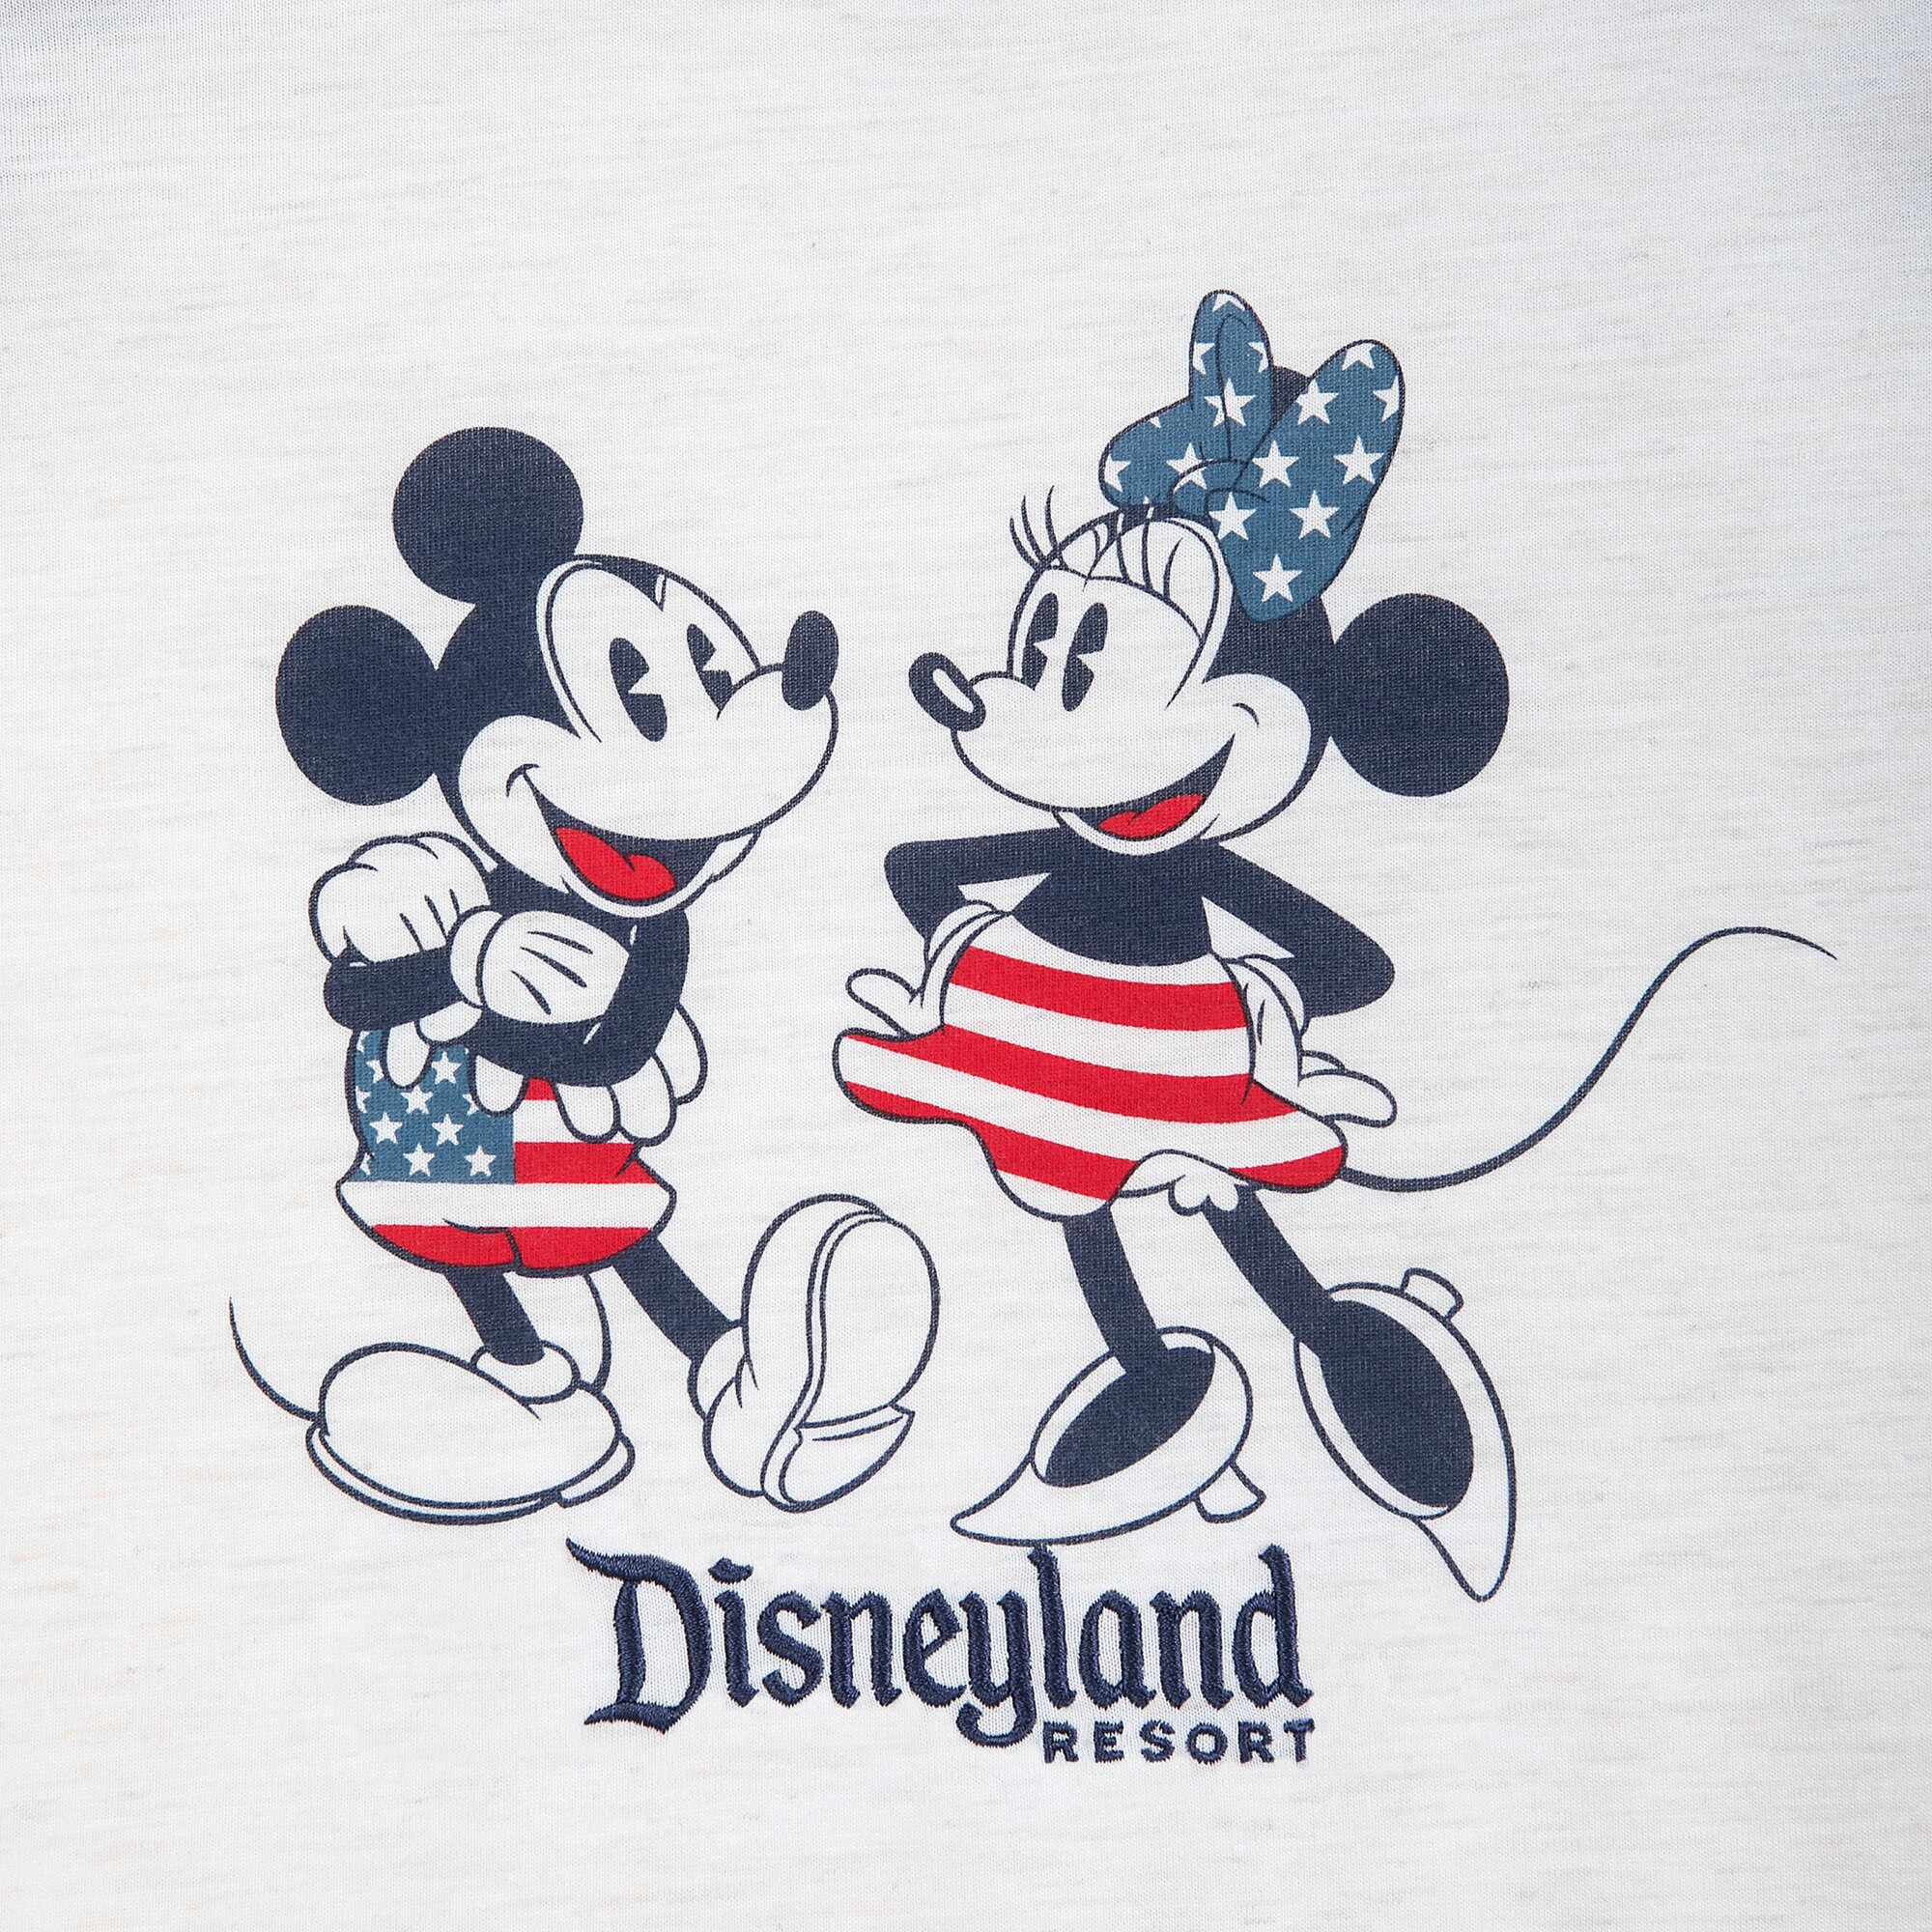 Mickey and Minnie Mouse Americana T-Shirt for Women - Disneyland